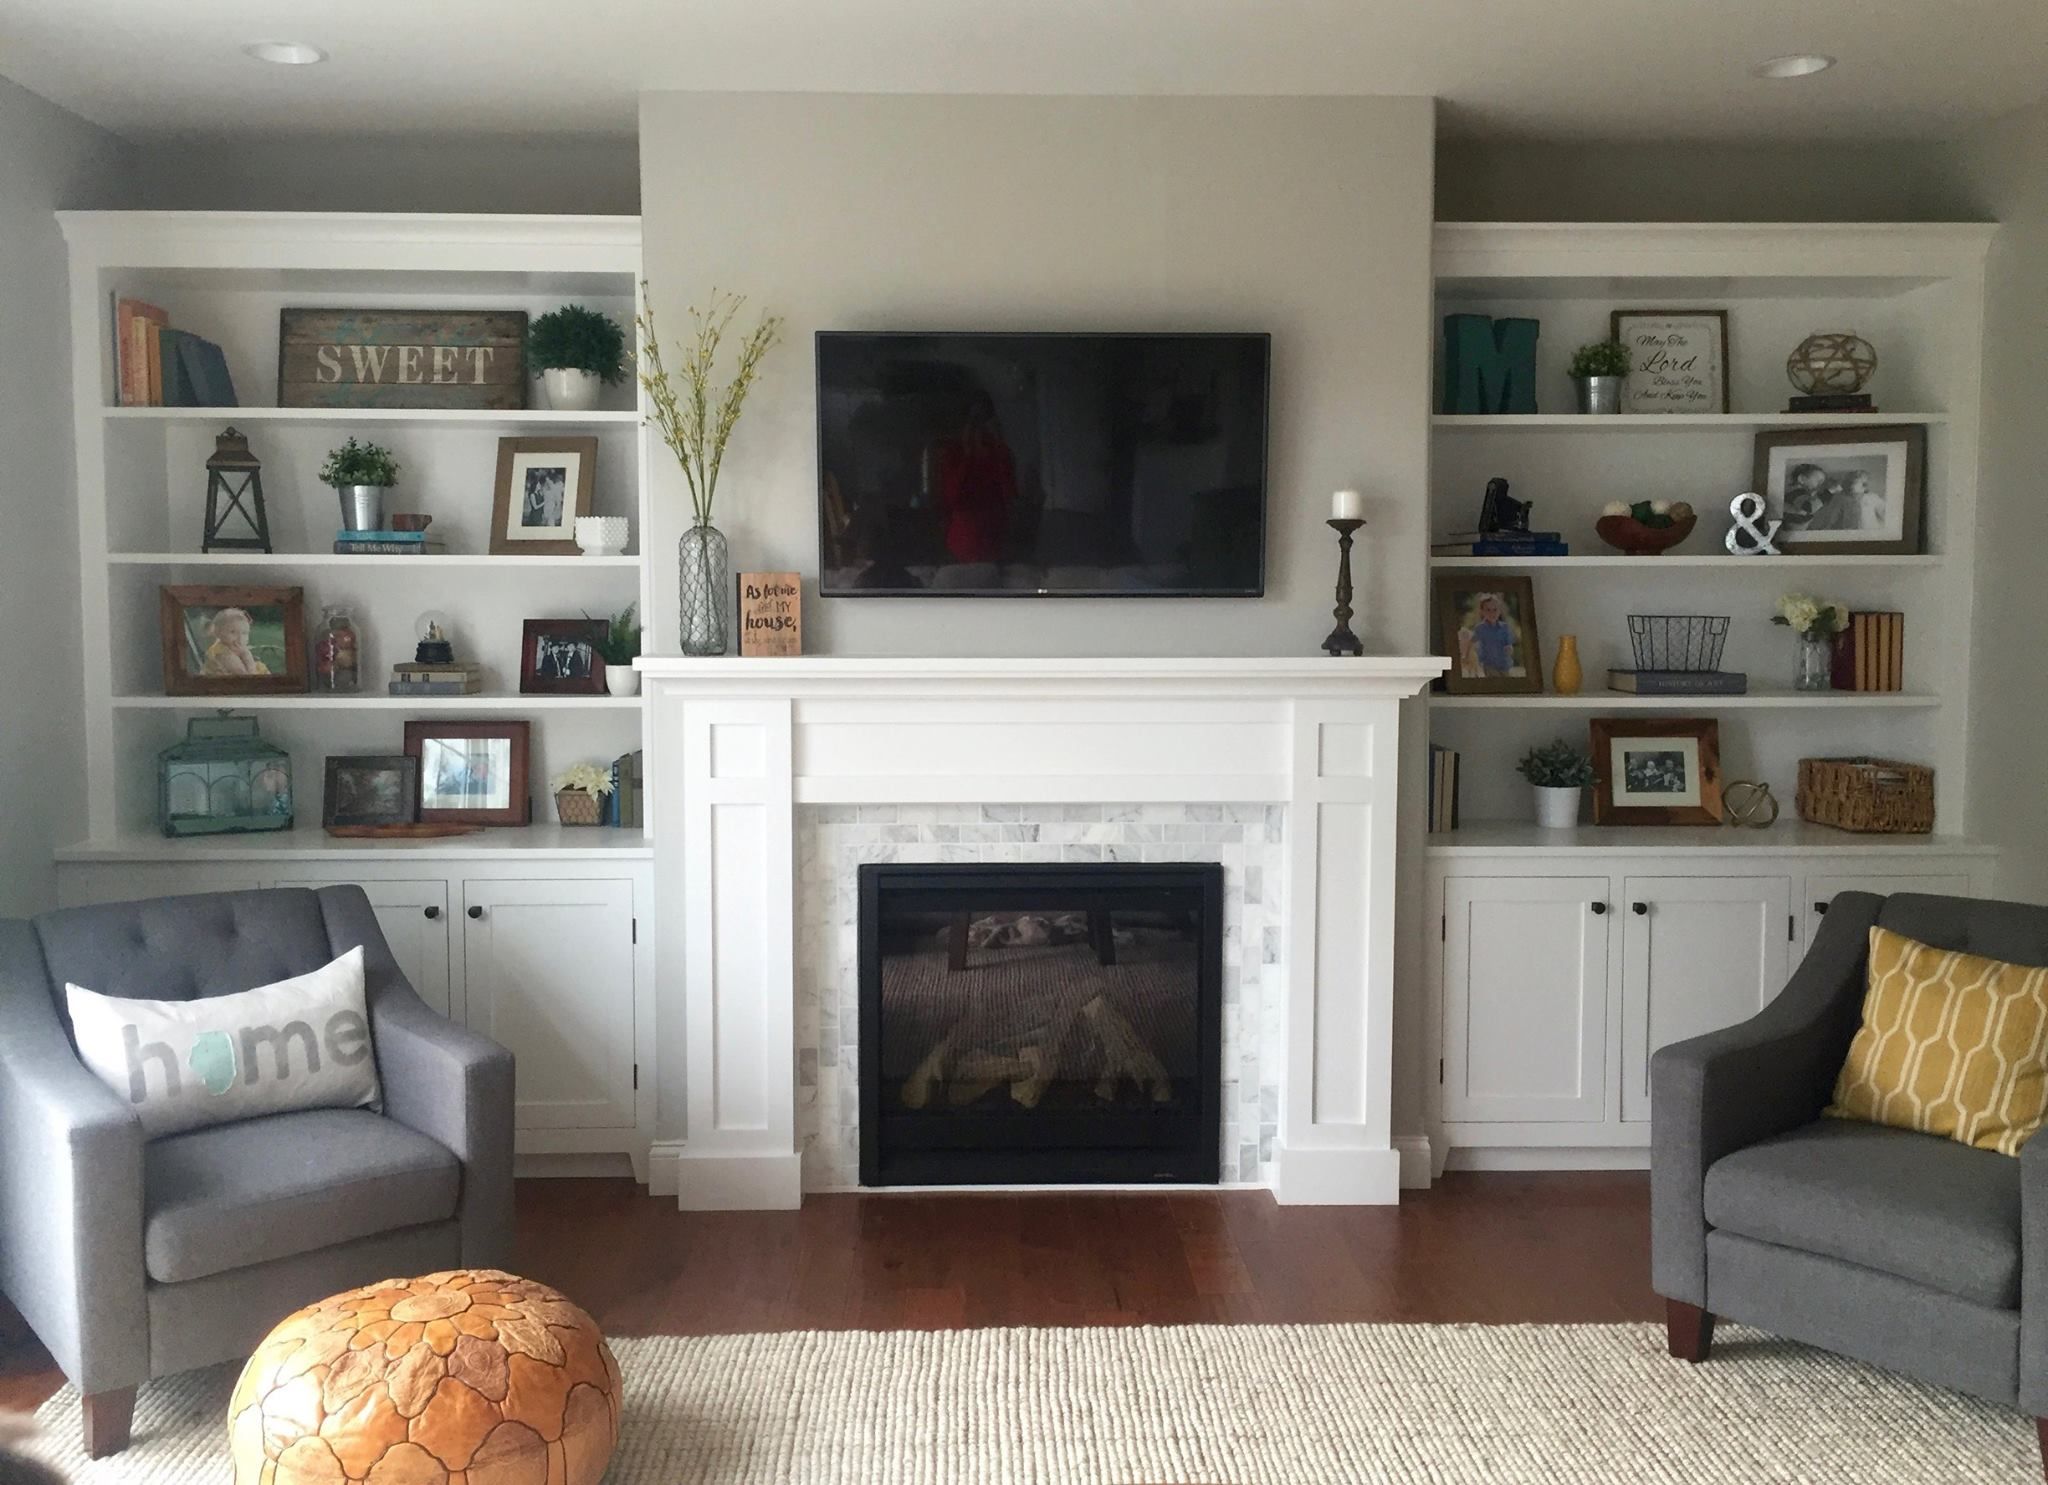 Center Room Fireplace Elegant How to Build A Built In the Cabinets Woodworking